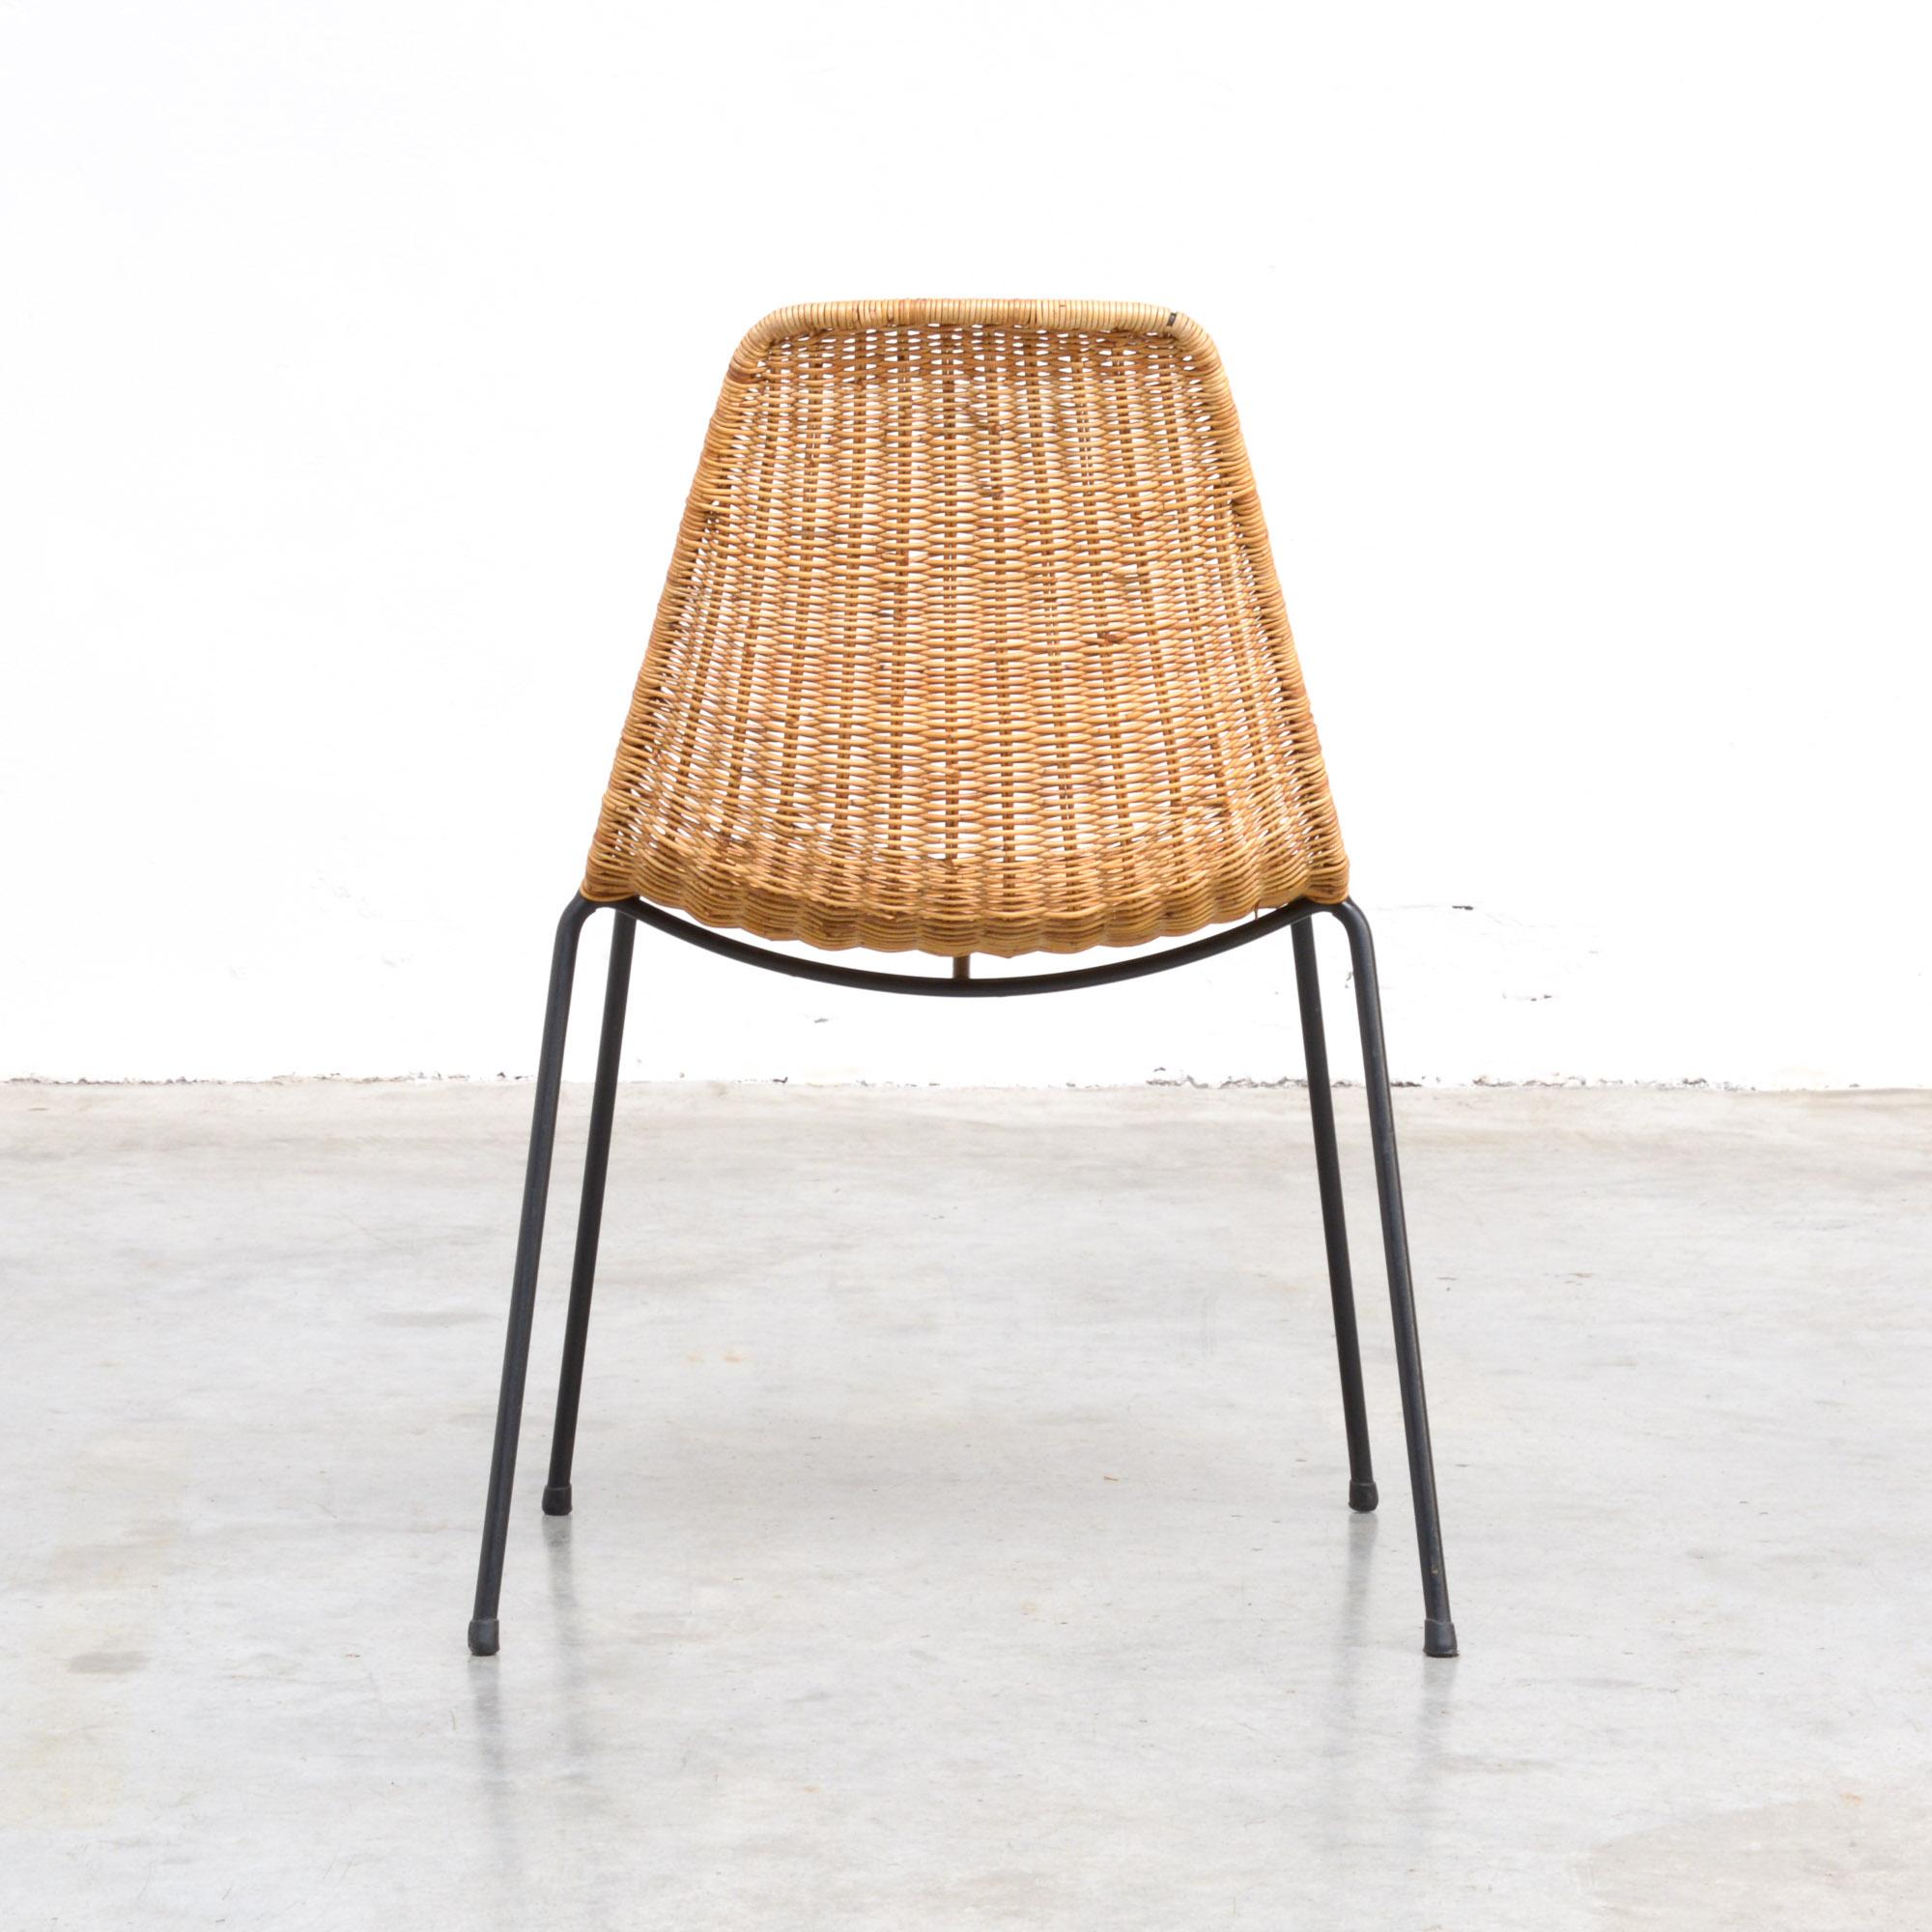 Mid-20th Century Wicker Dining Chairs by Gian Franco Legler